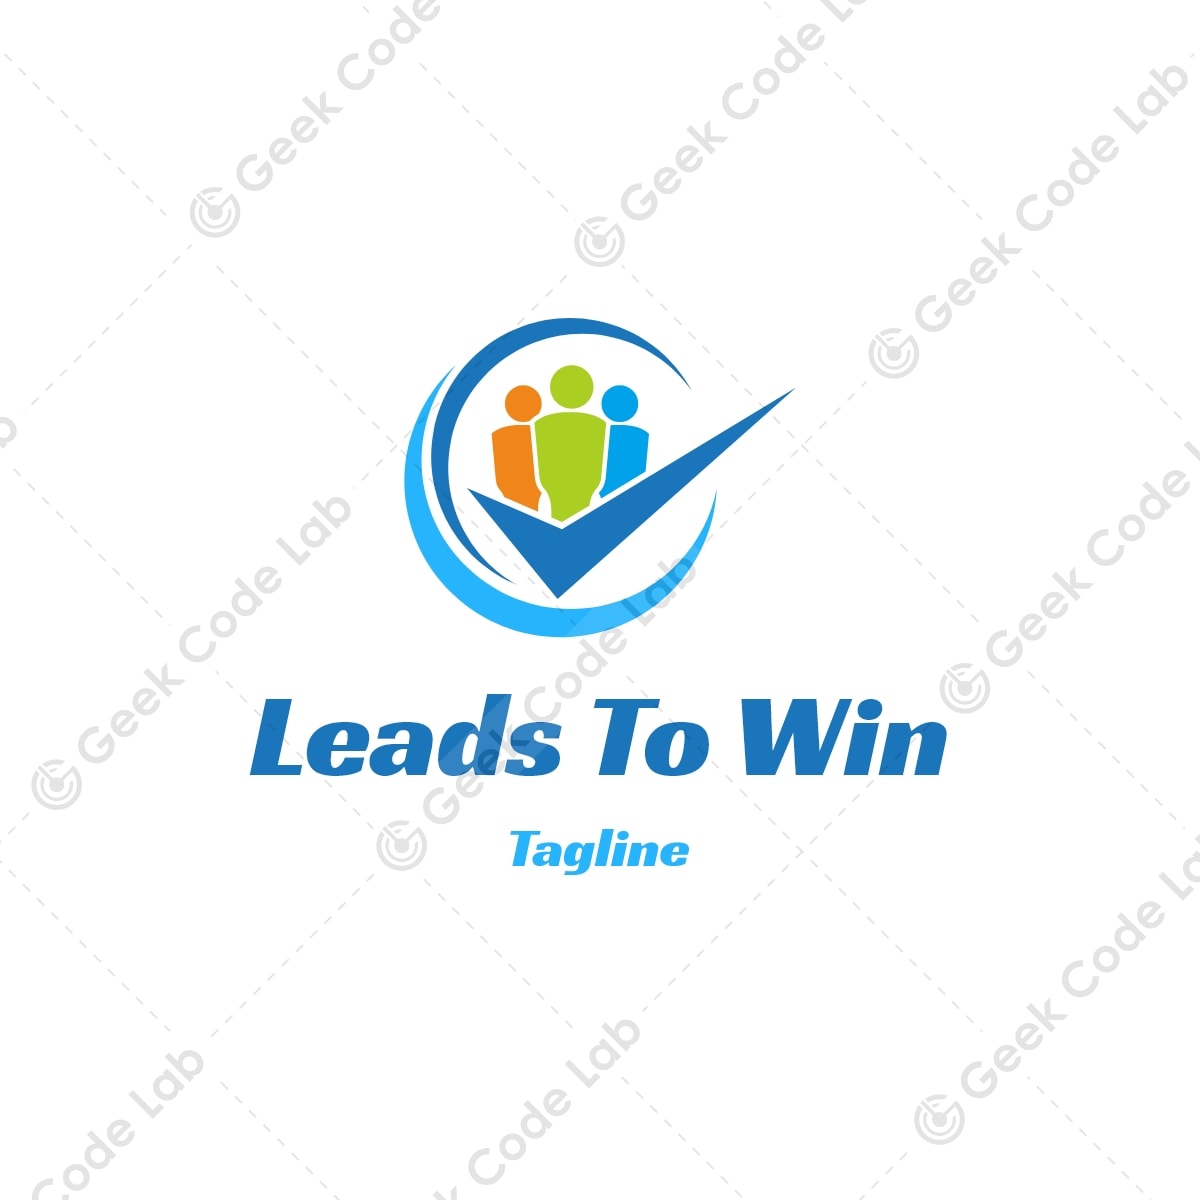 Leads to Win